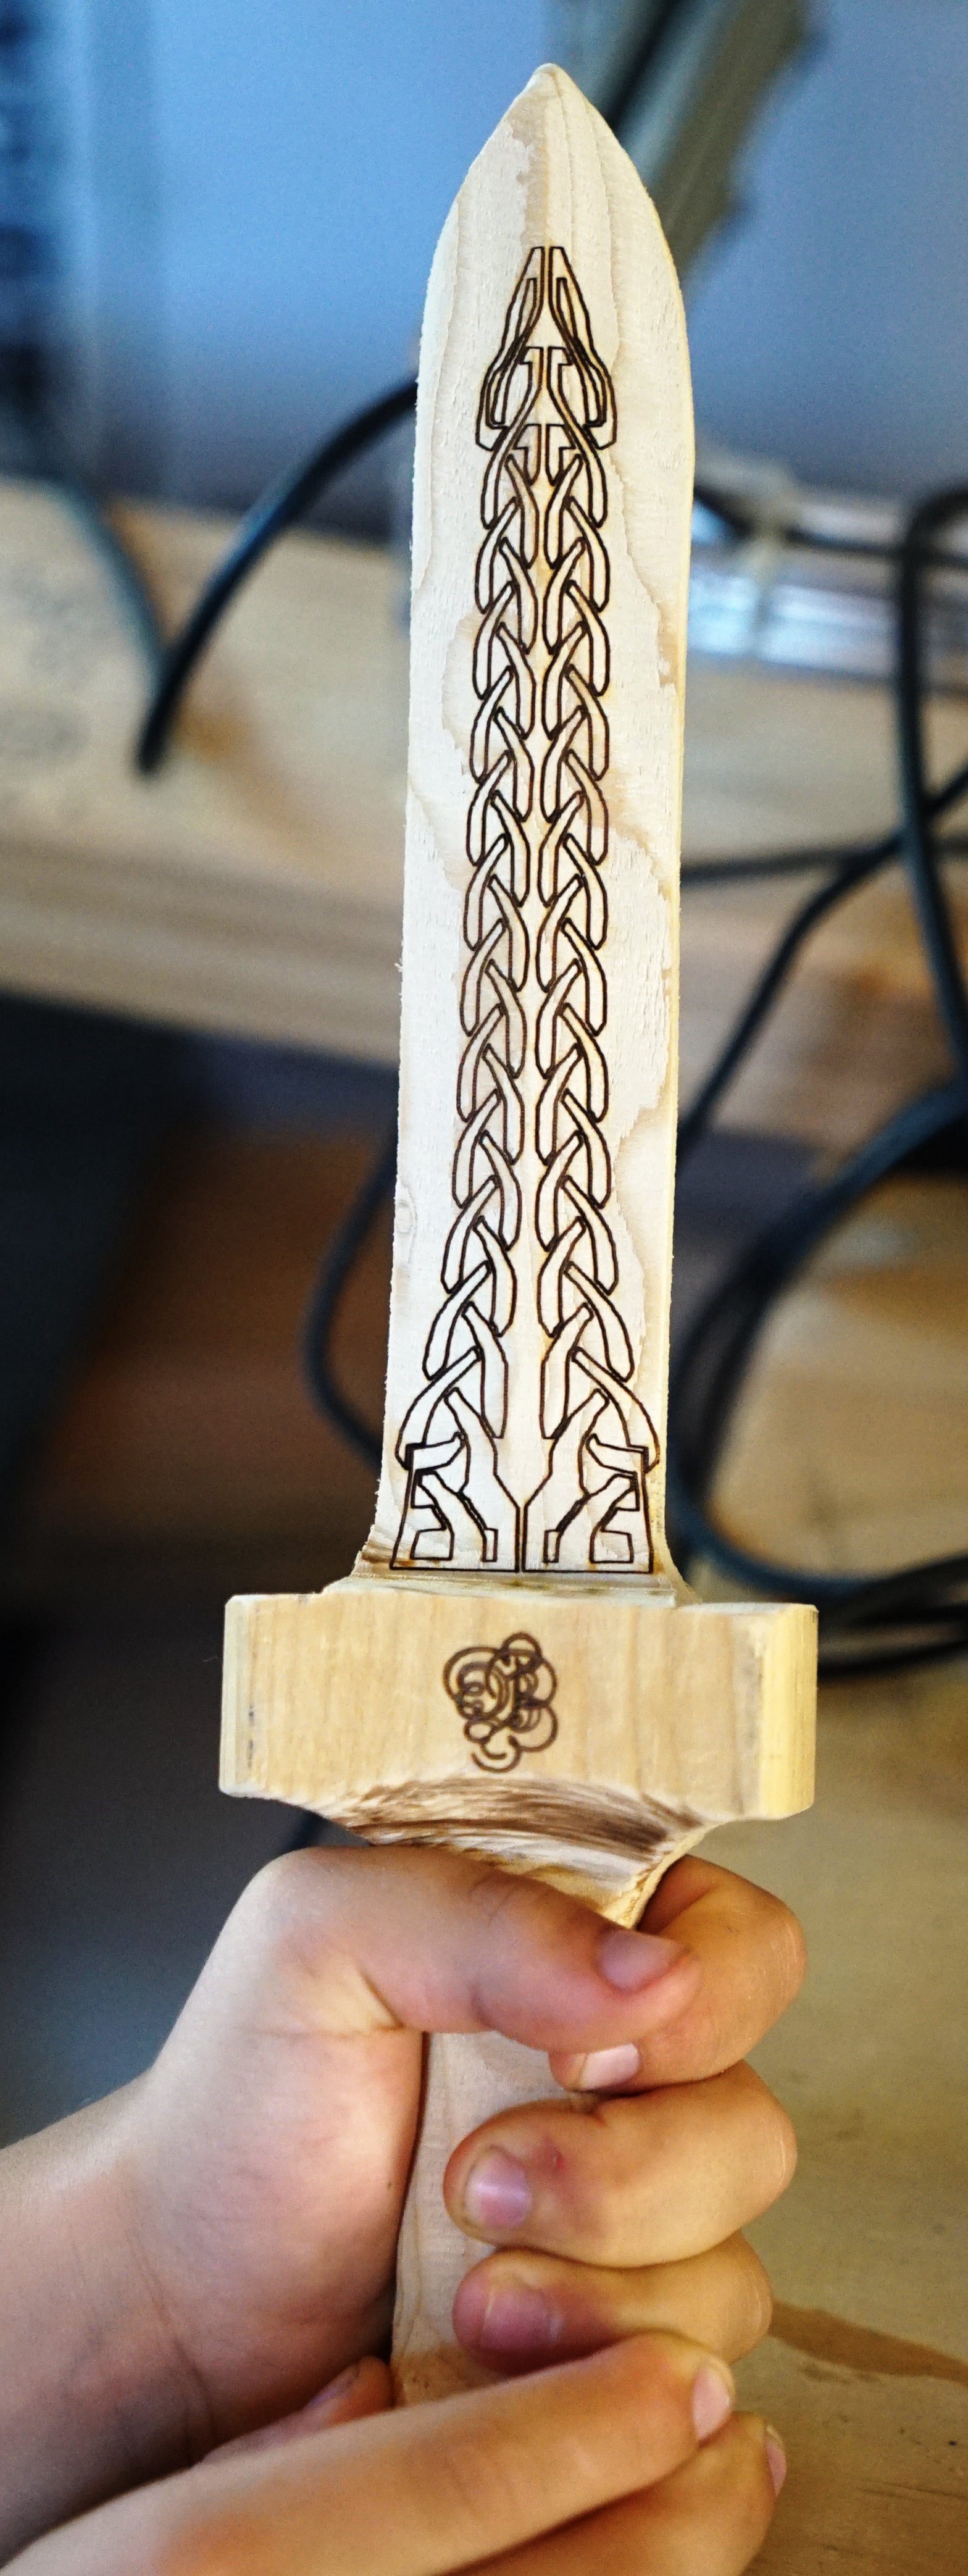 A custom wood heavy dagger with custom celtic knot and monogram laser engraving. Contact us at tryop.com for pricing on custom pieces like this.